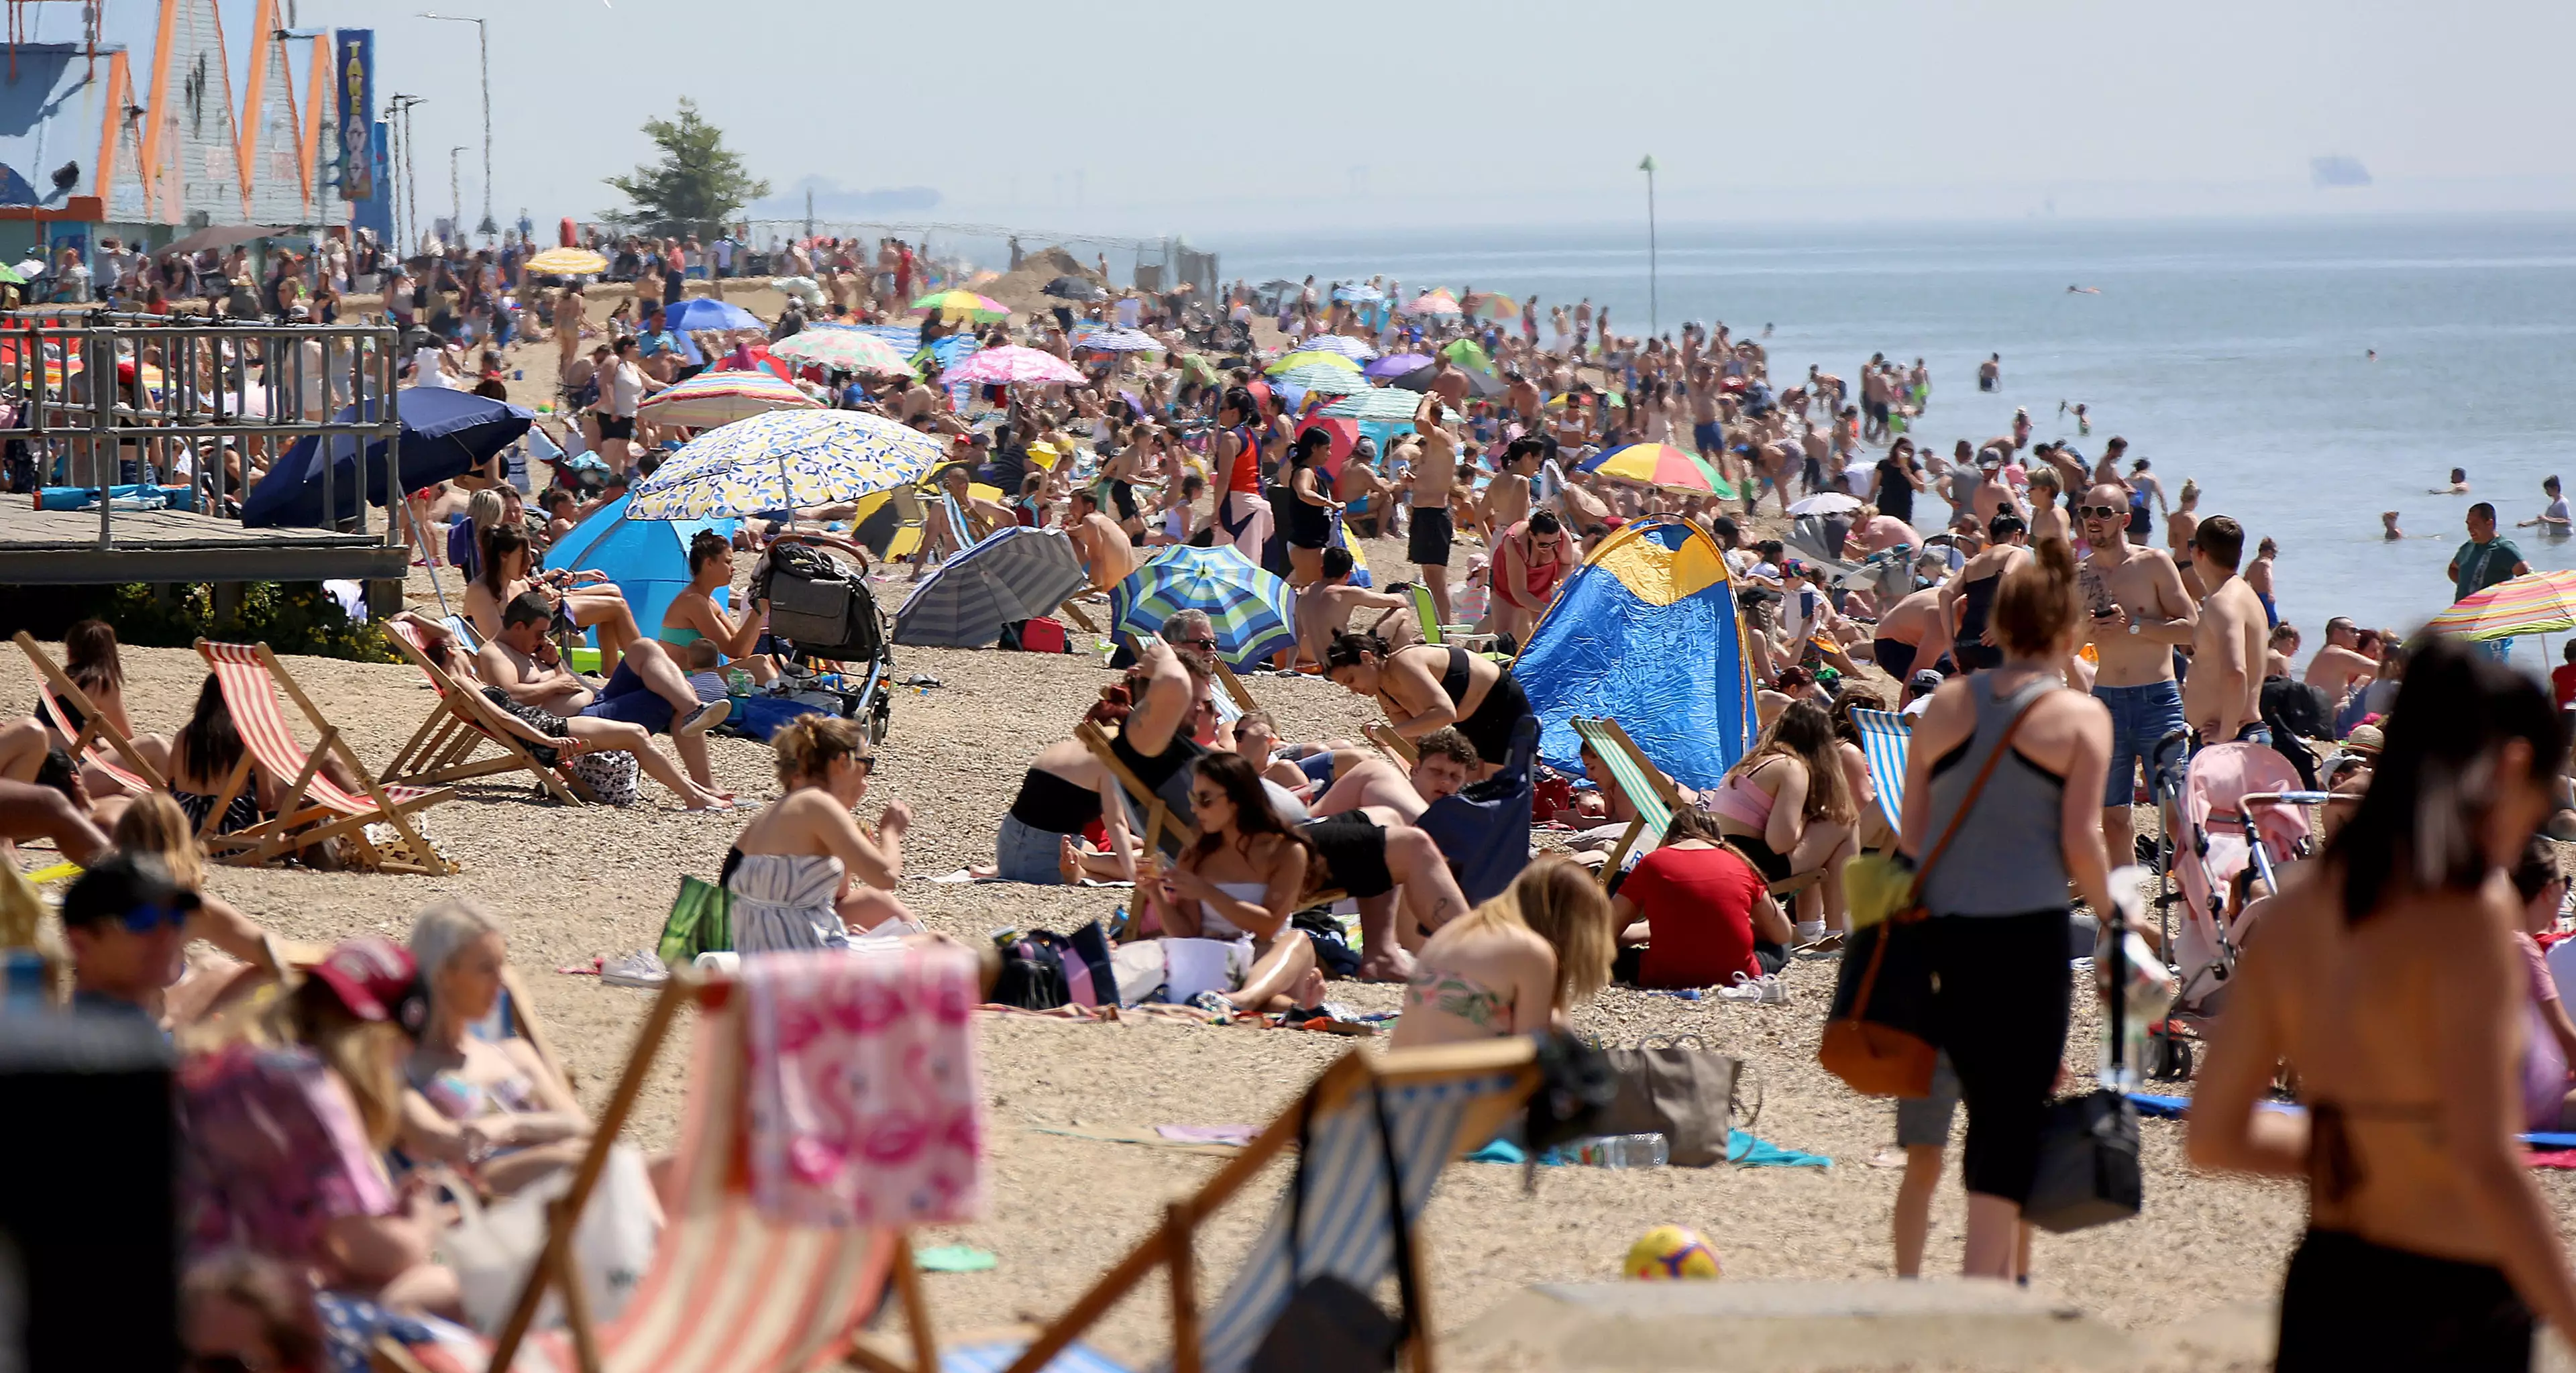 Southend beach was particularly crowded this afternoon.